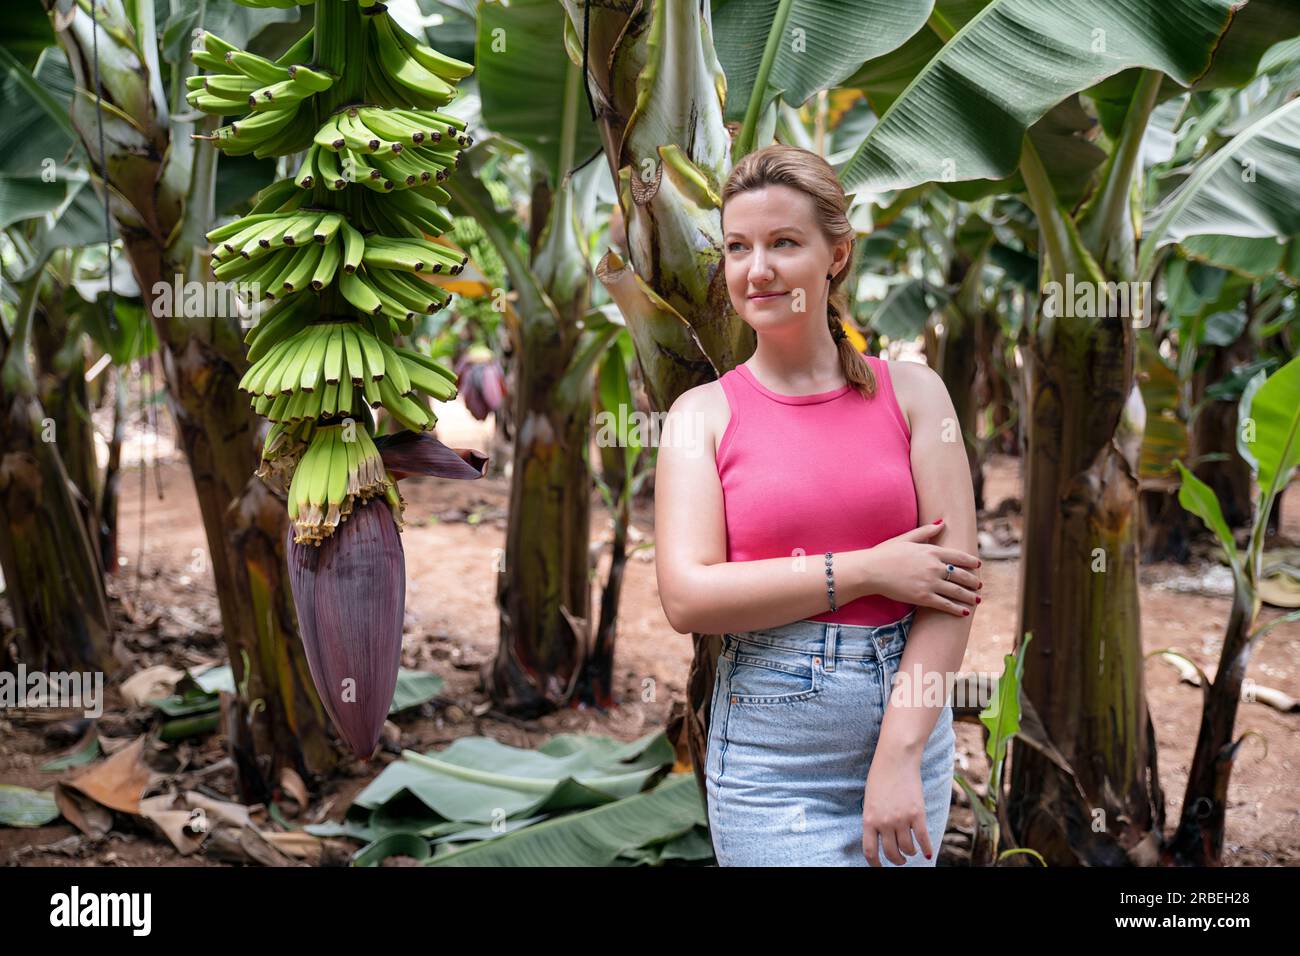 Young Caucasian woman smiling gently and enjoying the nature surrounding her, a banana plantation with lots of healthy trees and clusters of bananas Stock Photo